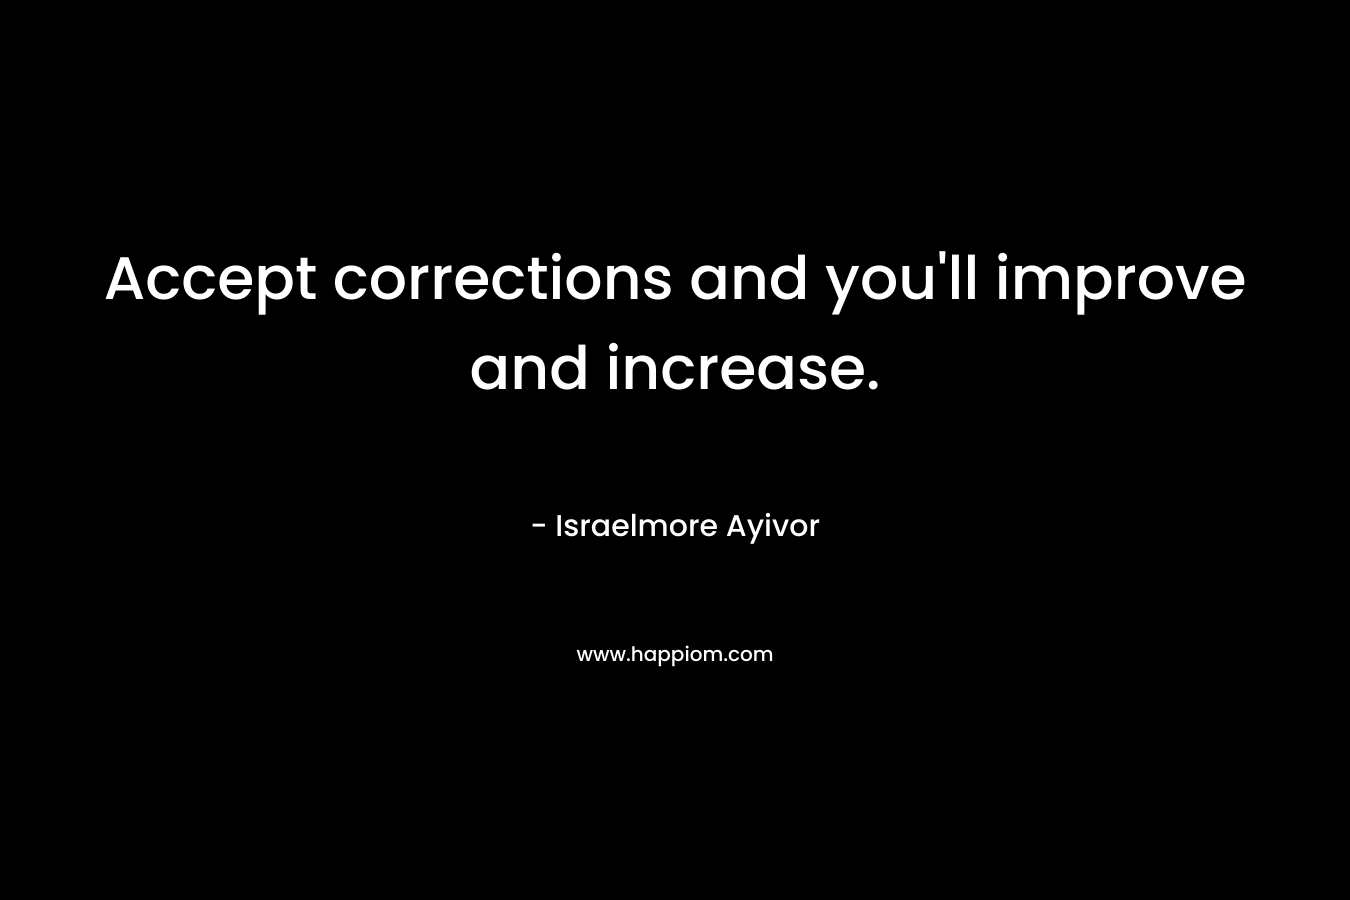 Accept corrections and you'll improve and increase.